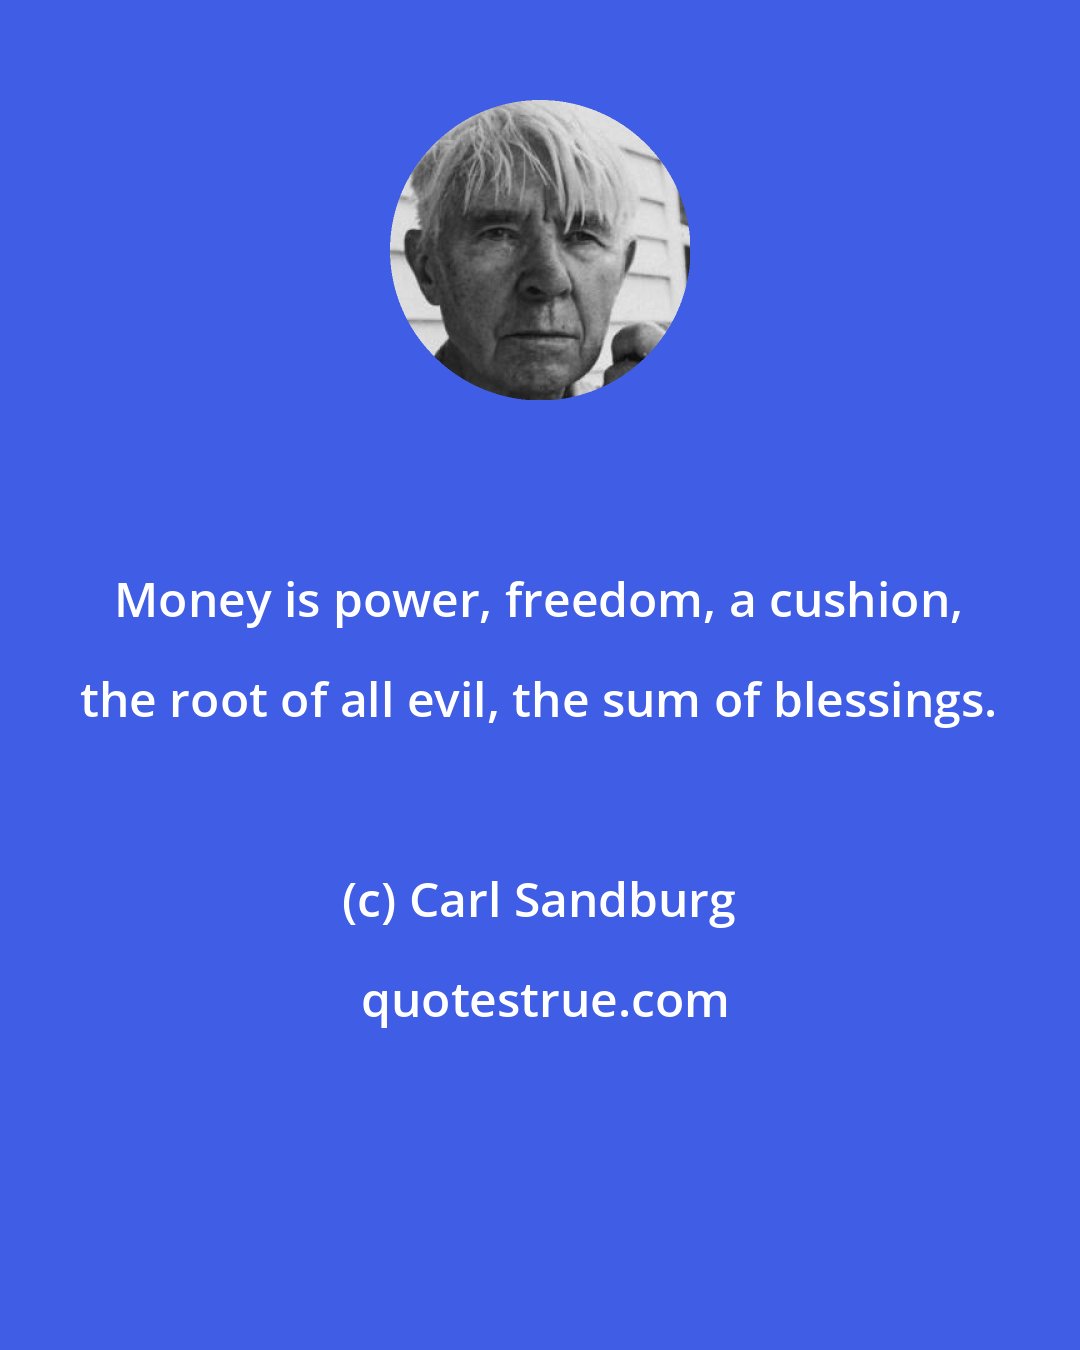 Carl Sandburg: Money is power, freedom, a cushion, the root of all evil, the sum of blessings.